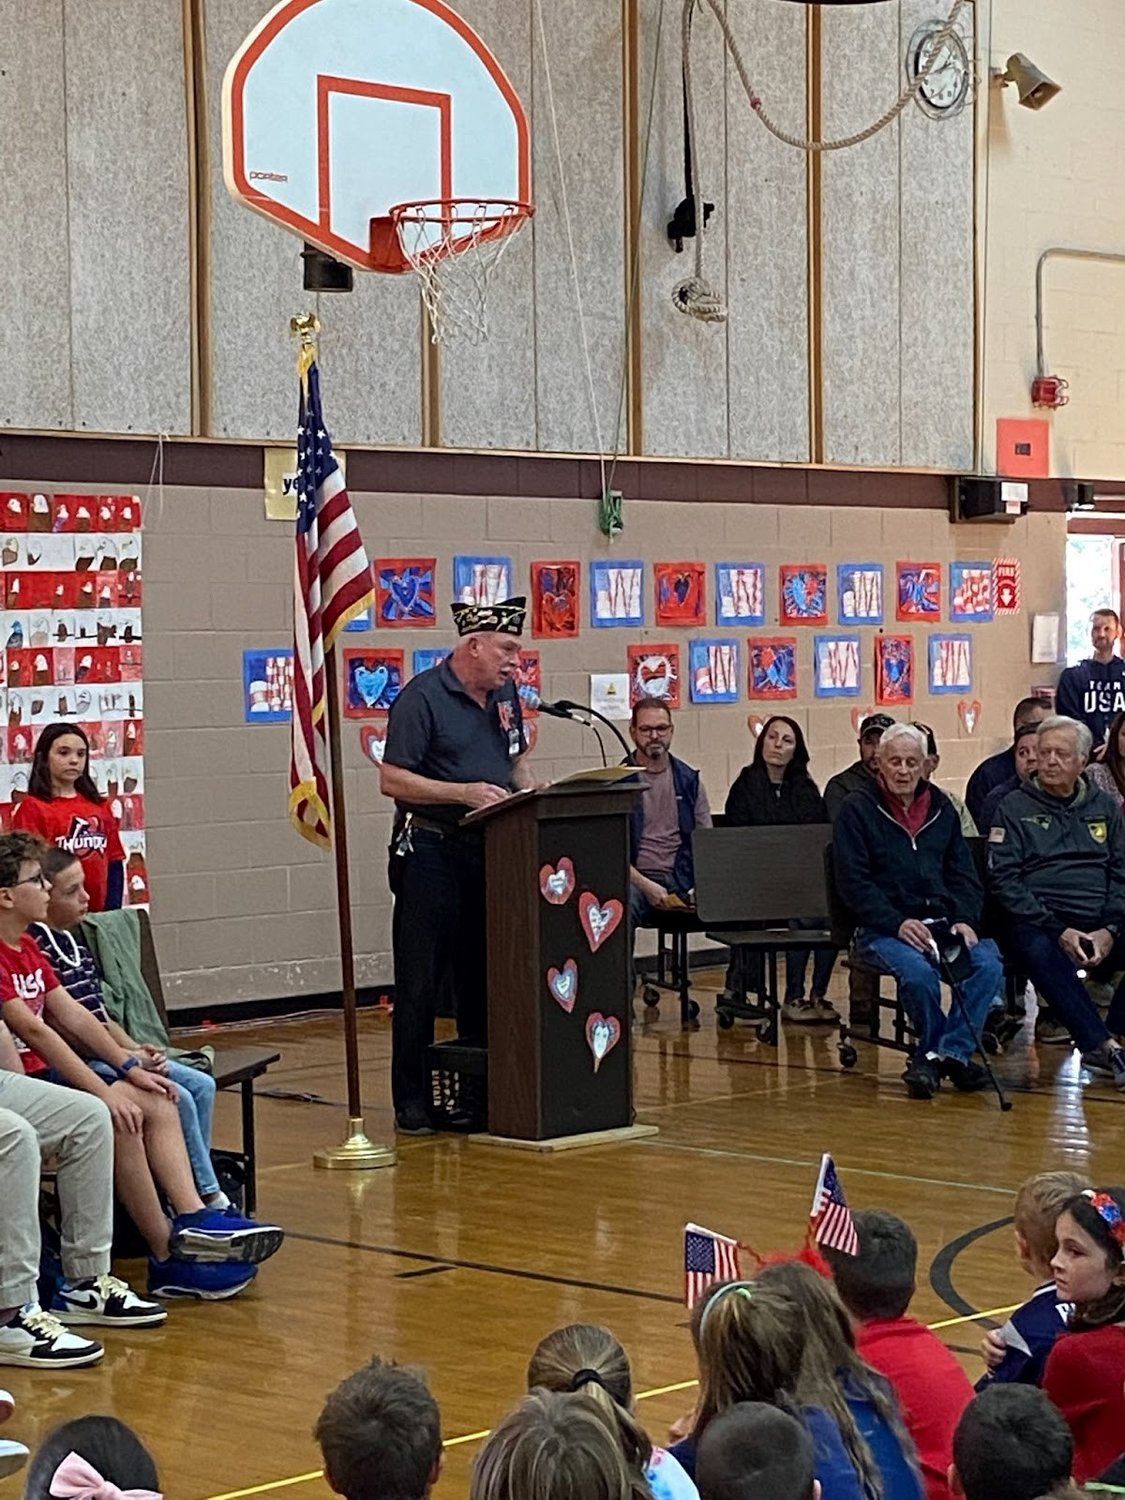 Mr. Jake Kramer, Veterans Agent for the Town of Rehoboth spoke to the audience of staff, students, families, invited guests, and local veterans during Palmer River Elementary School’s Veterans Day Tribute.